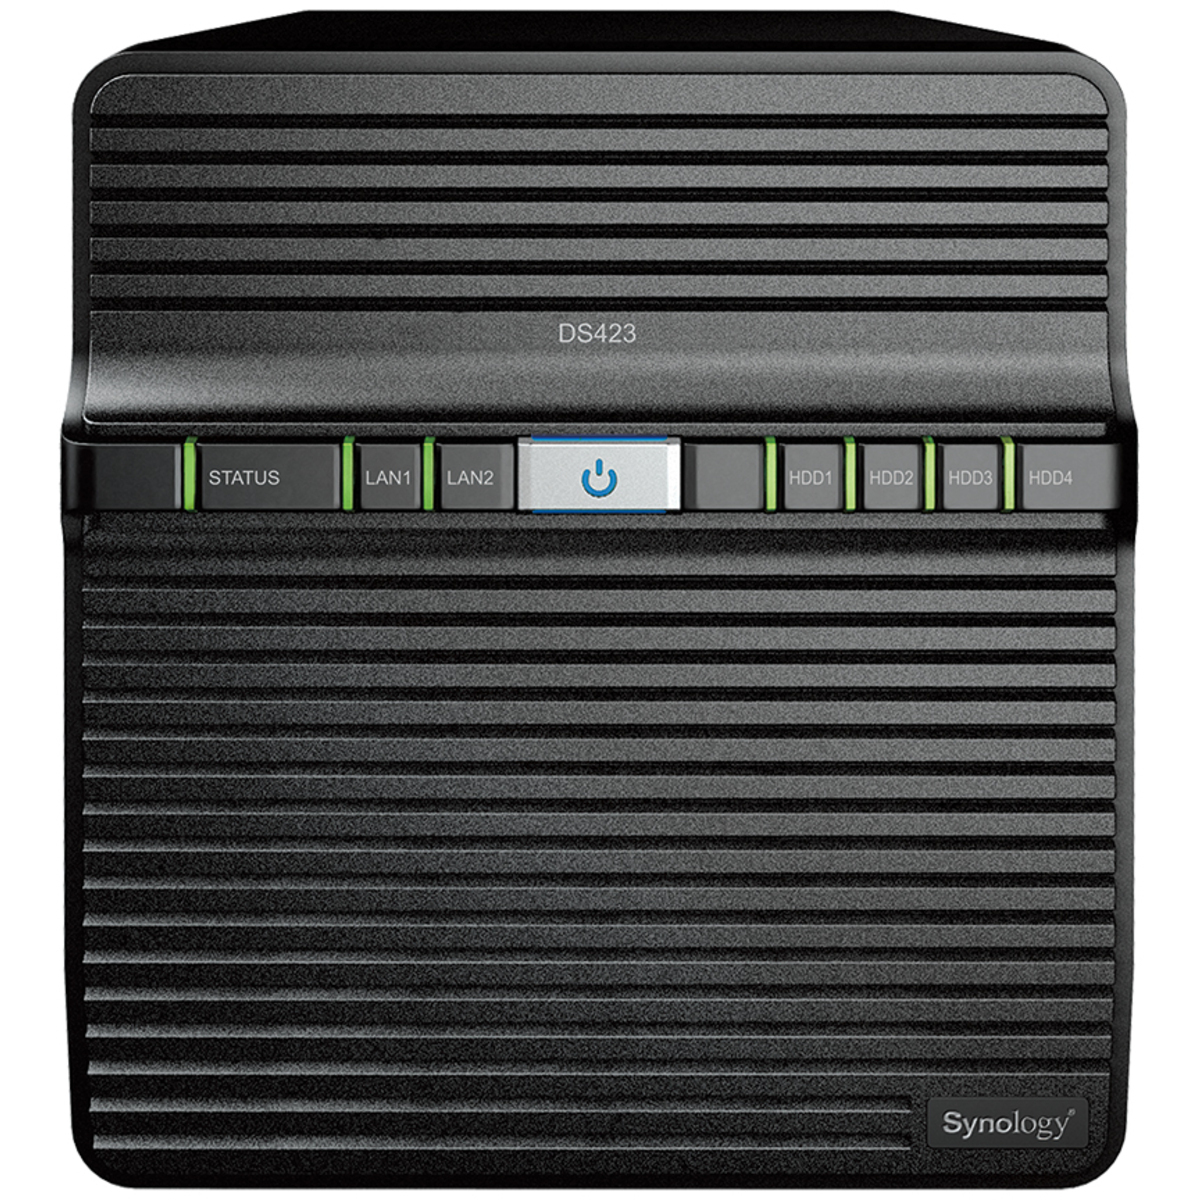 Synology DiskStation DS423 3tb 4-Bay Desktop Personal / Basic Home / Small Office NAS - Network Attached Storage Device 3x1tb Sandisk Ultra 3D SDSSDH3-1T00 2.5 560/520MB/s SATA 6Gb/s SSD CONSUMER Class Drives Installed - Burn-In Tested DiskStation DS423